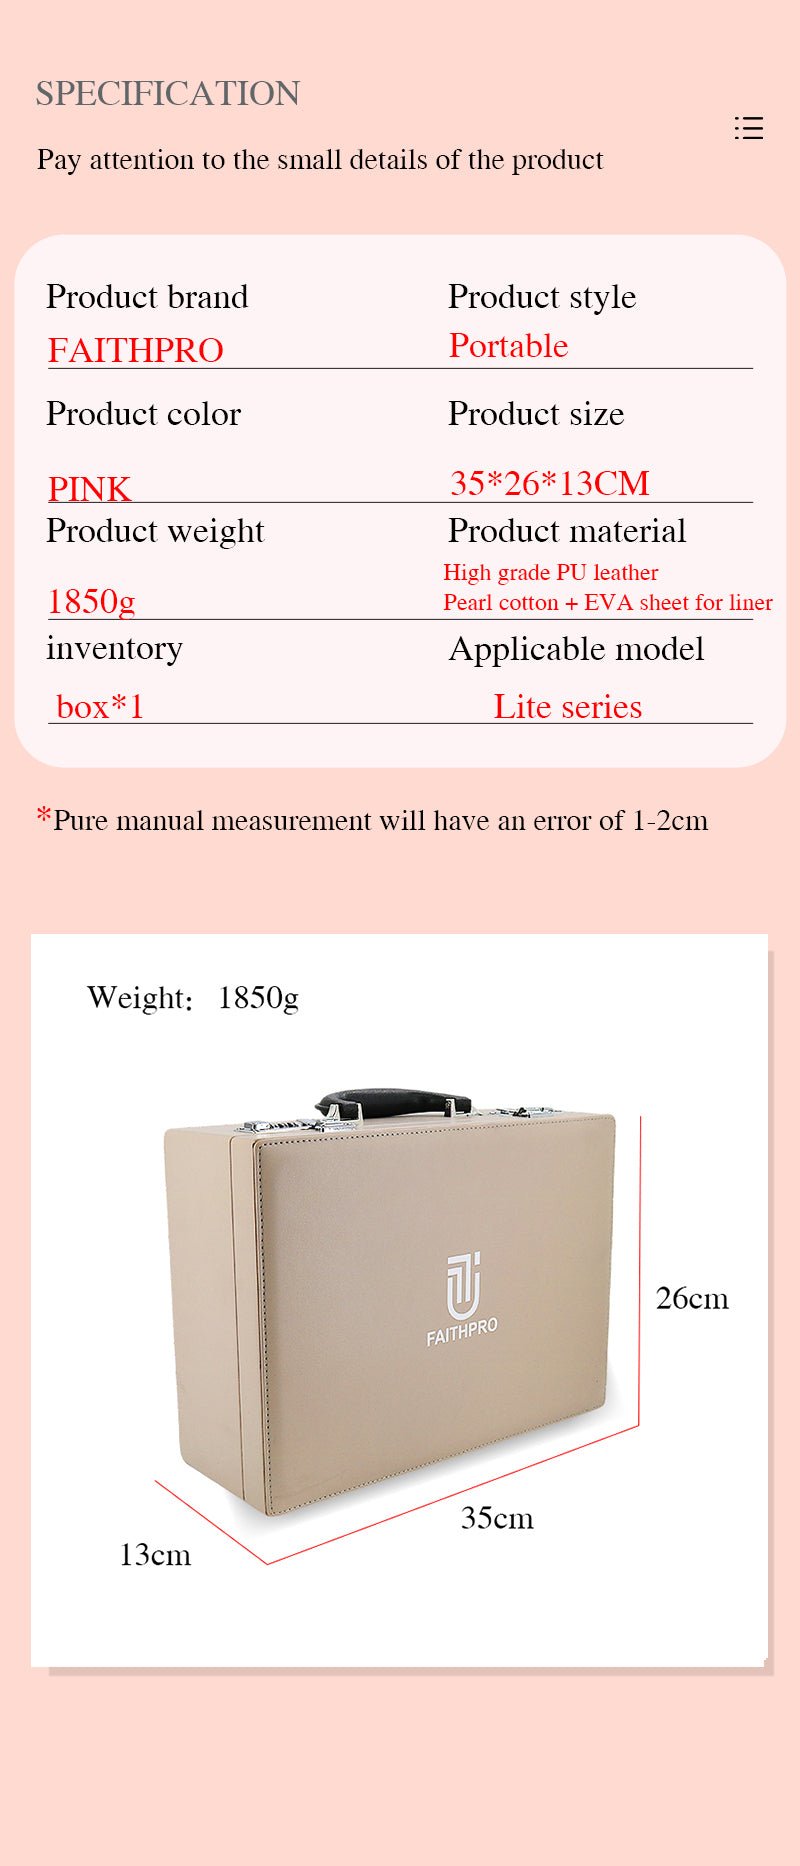 evo lite box specification and size